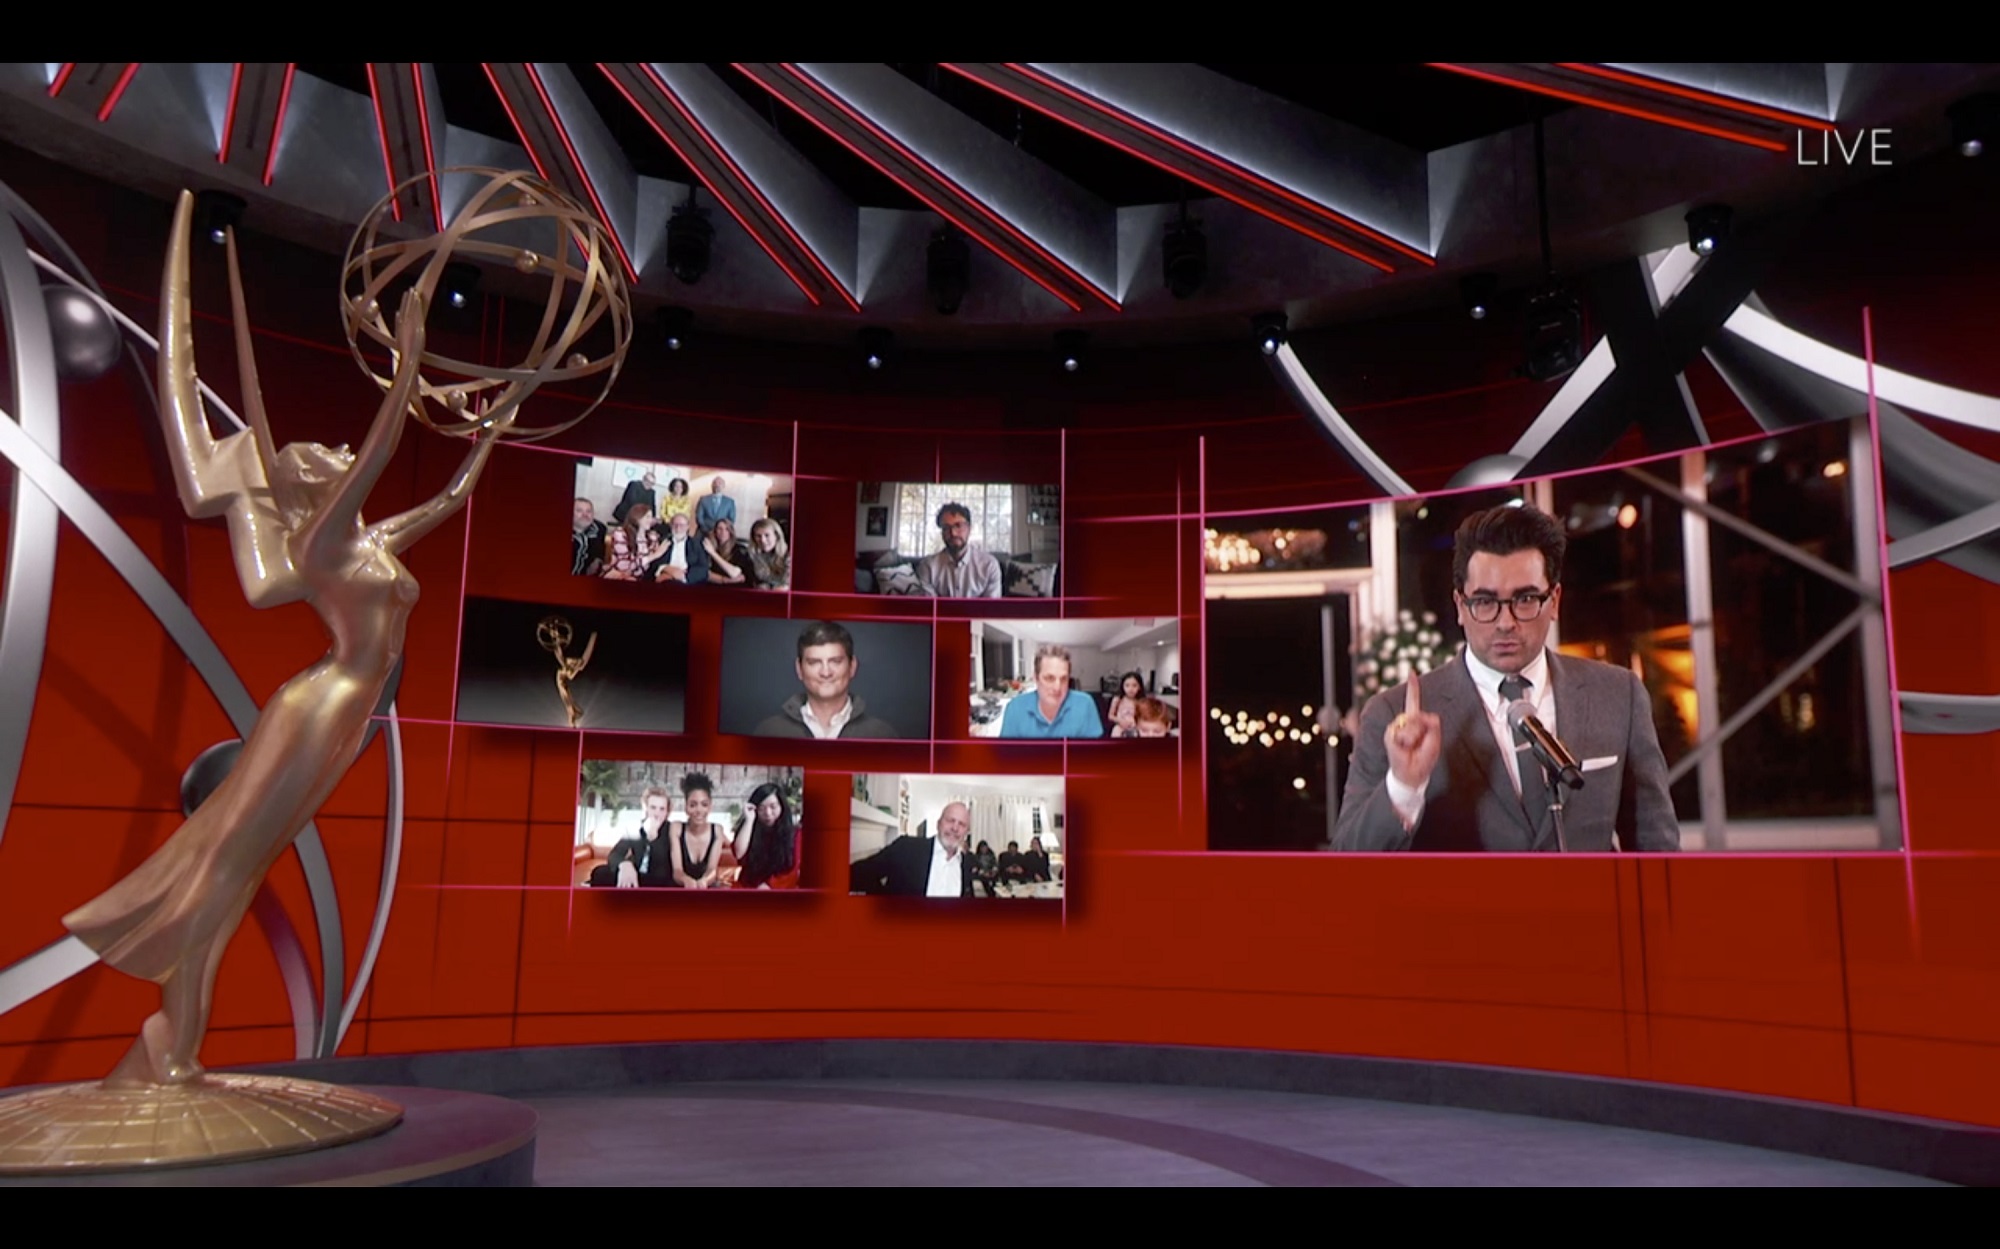 The Emmys Pre-Show will take place later today - this is a scene from last year's Emmys